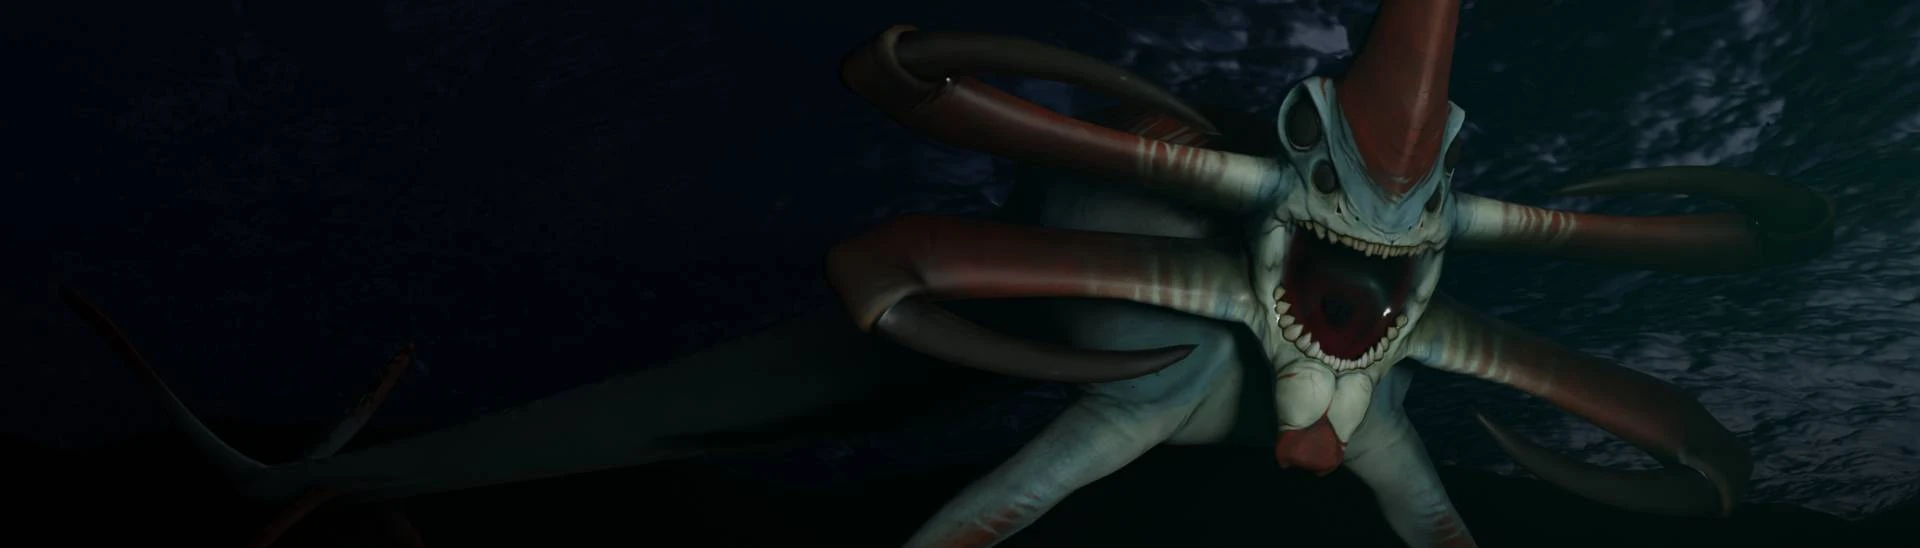 Scanning the Reaper Leviathan in Subnautica 